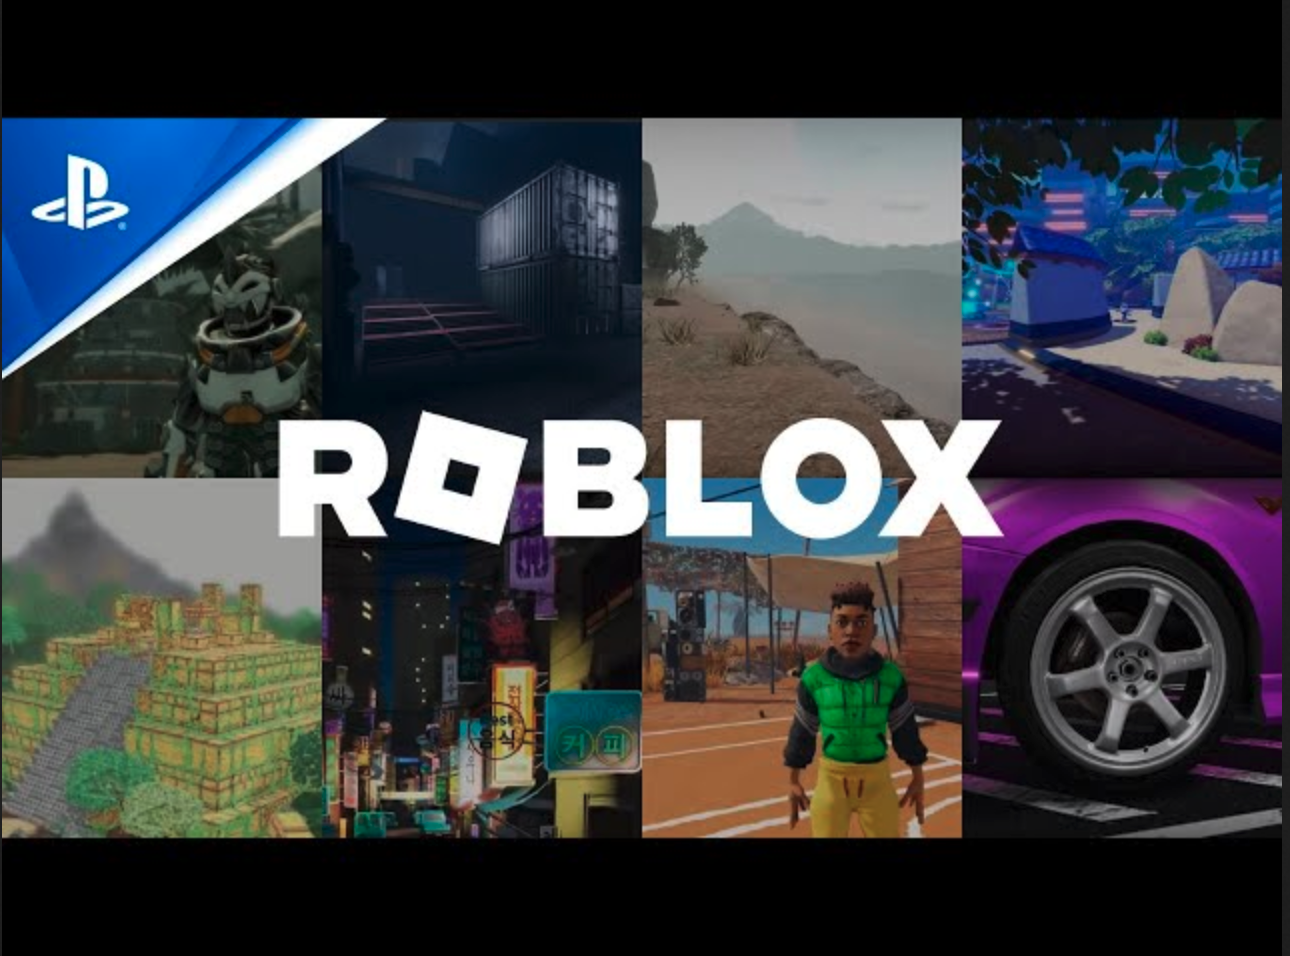 Roblox, Launch Trailer - PS5 & PS4 Games